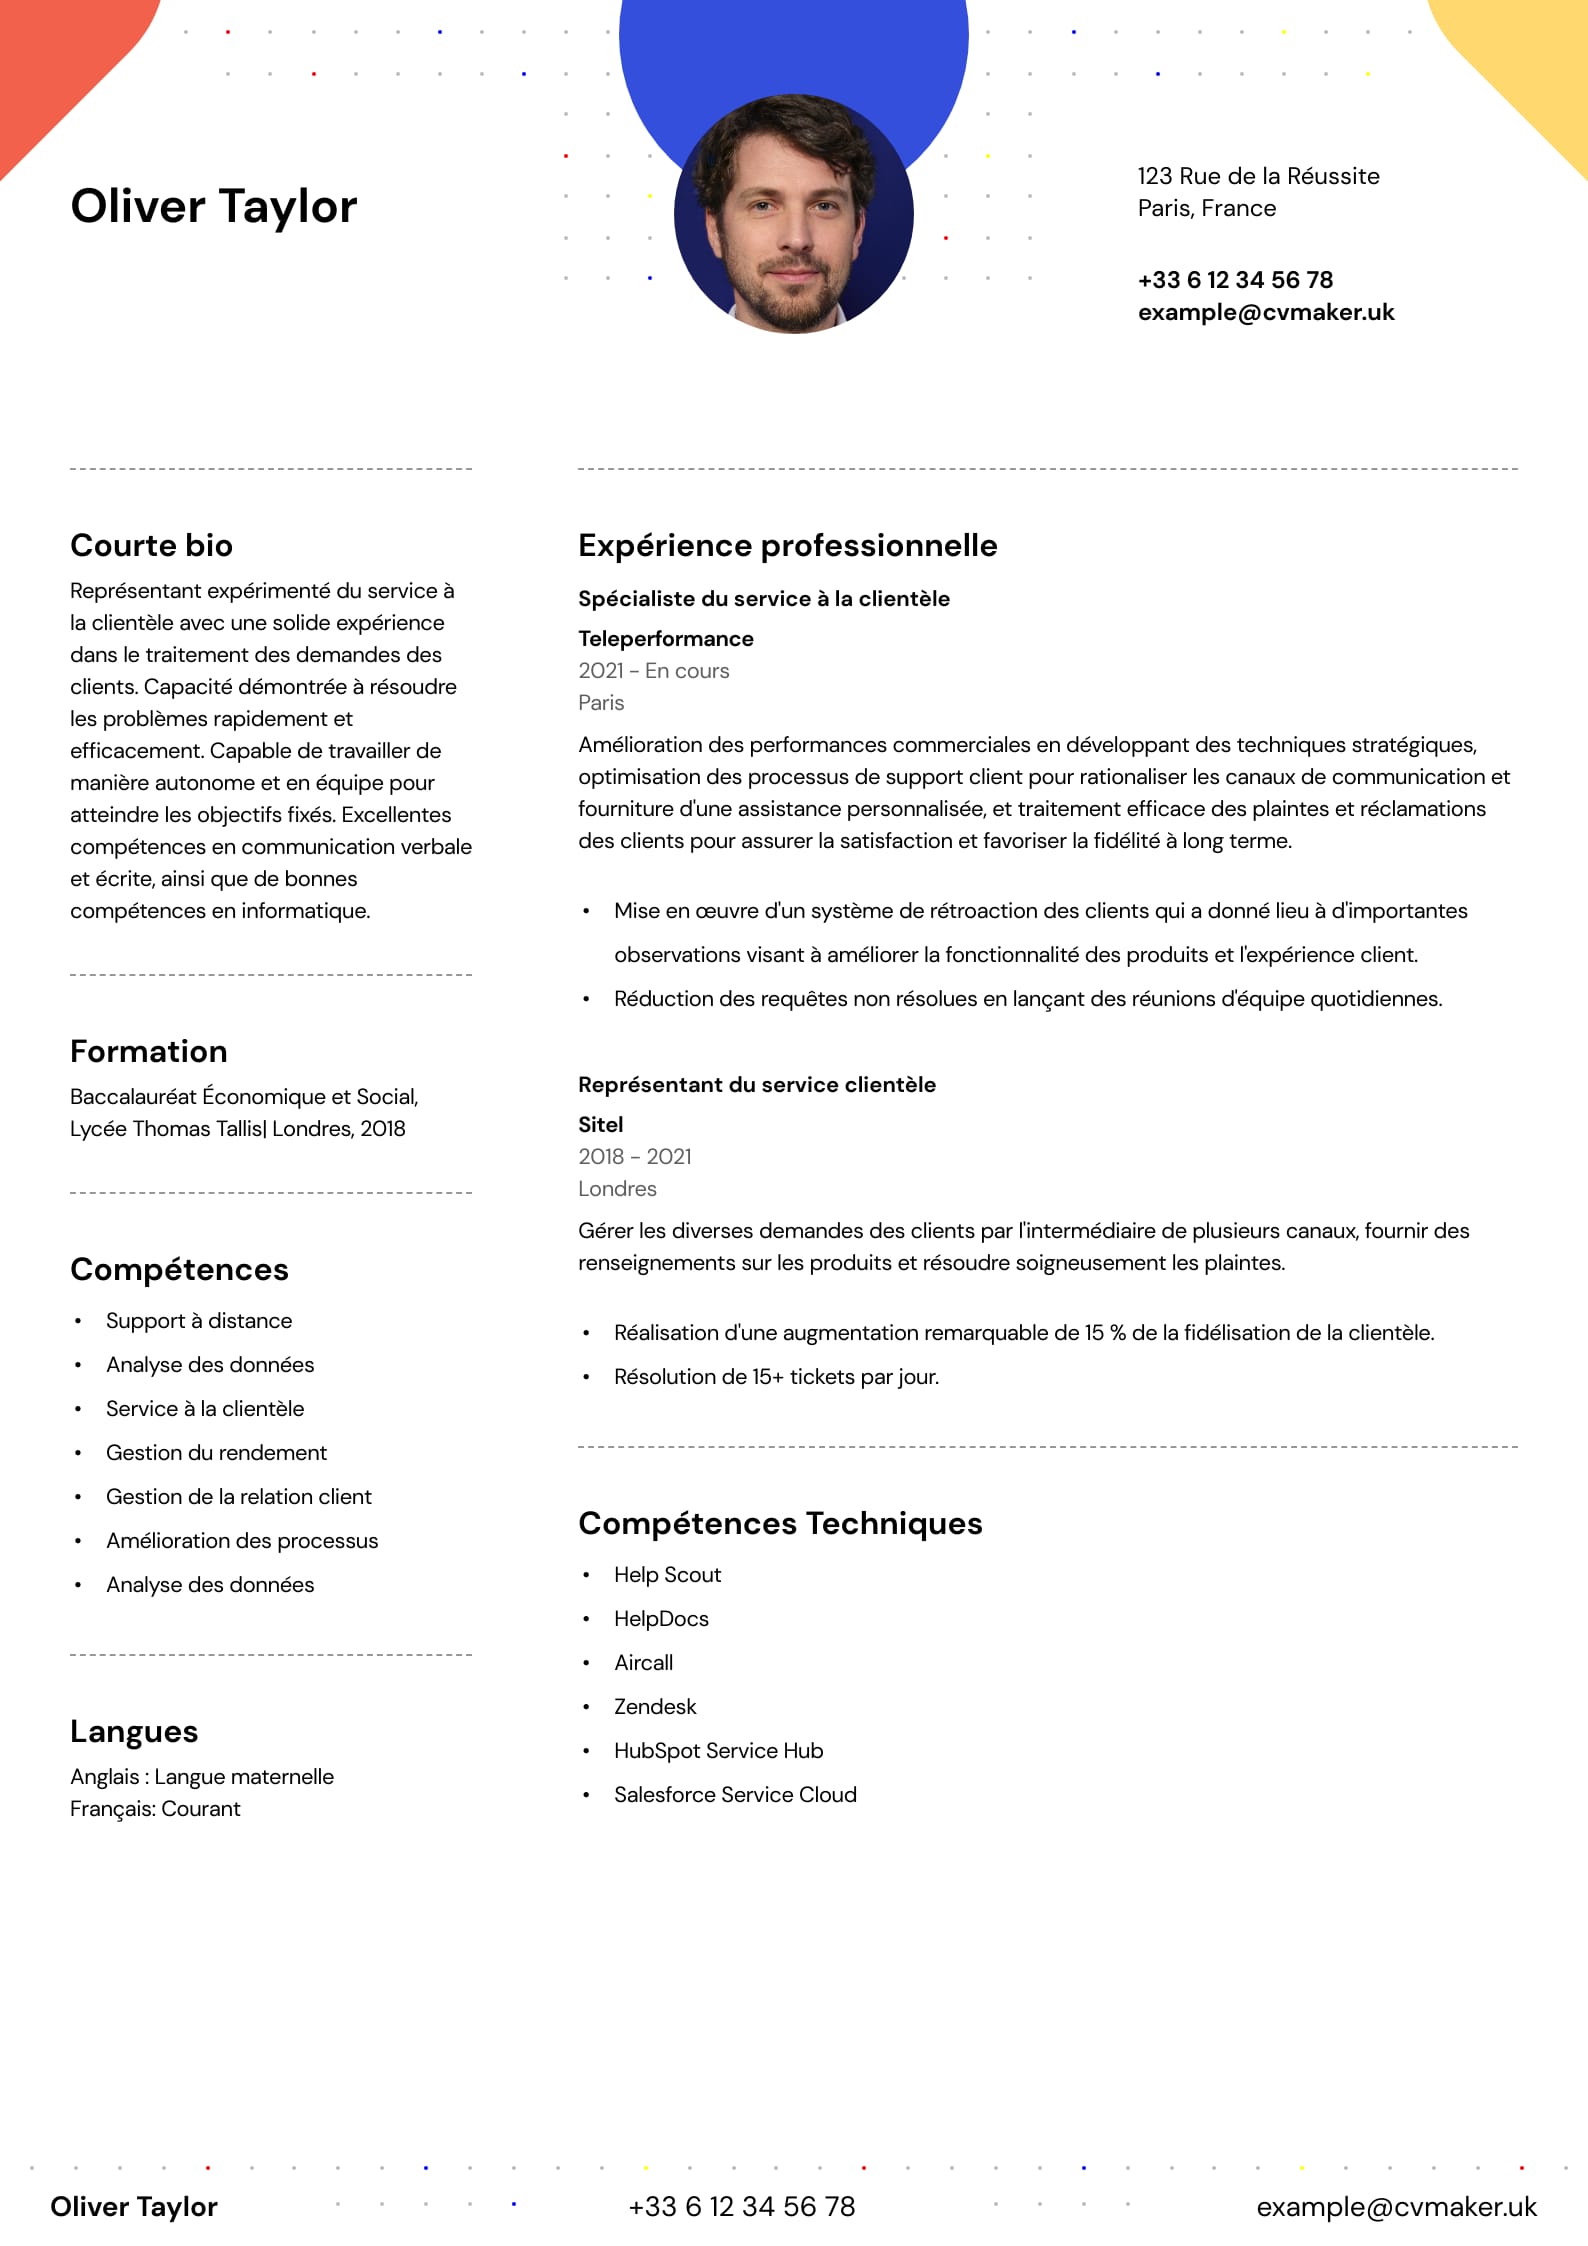 French CV template